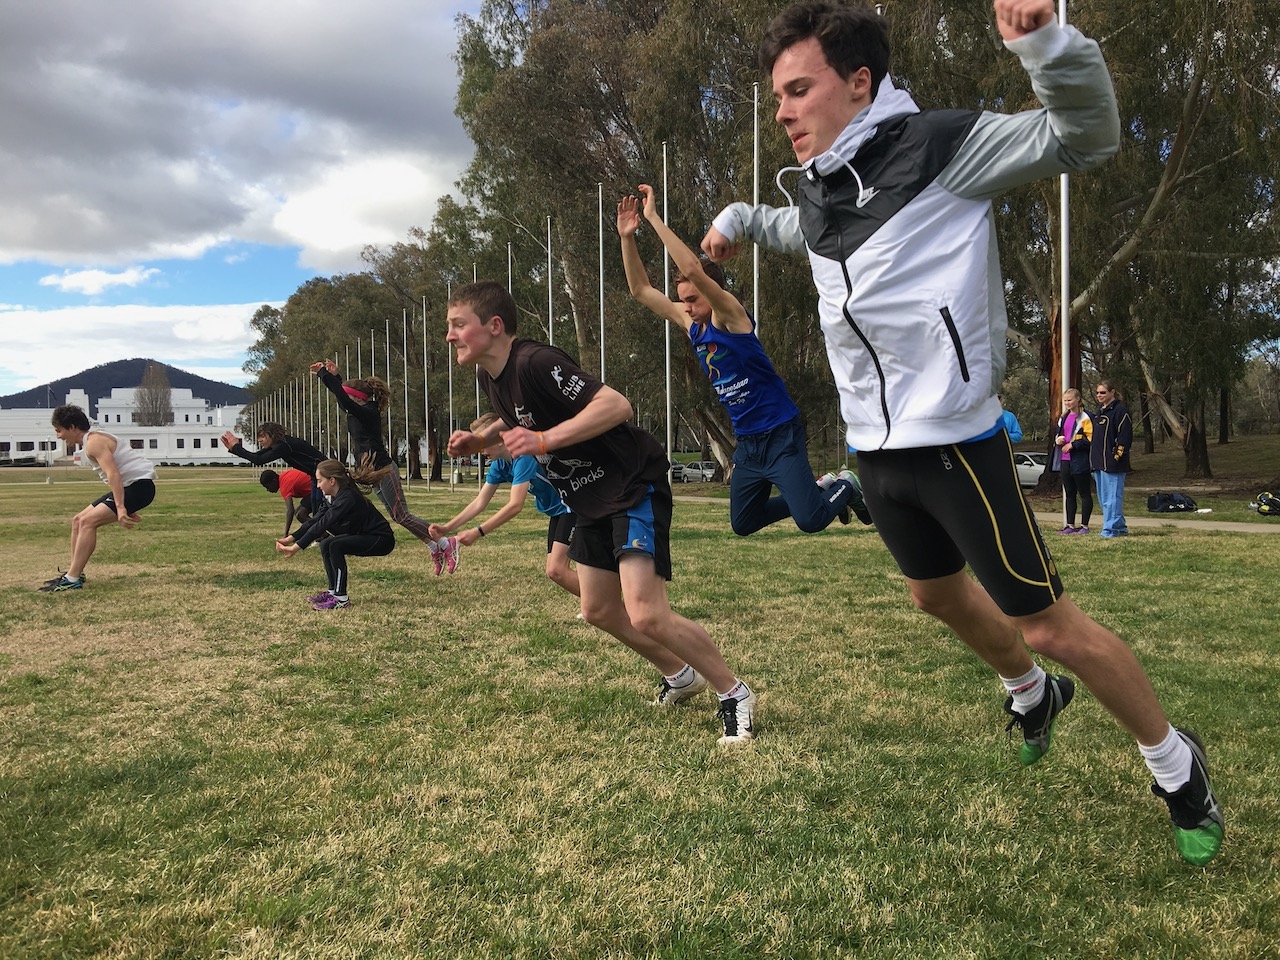 Sprint and hill running training at Parliament House in South Canberra